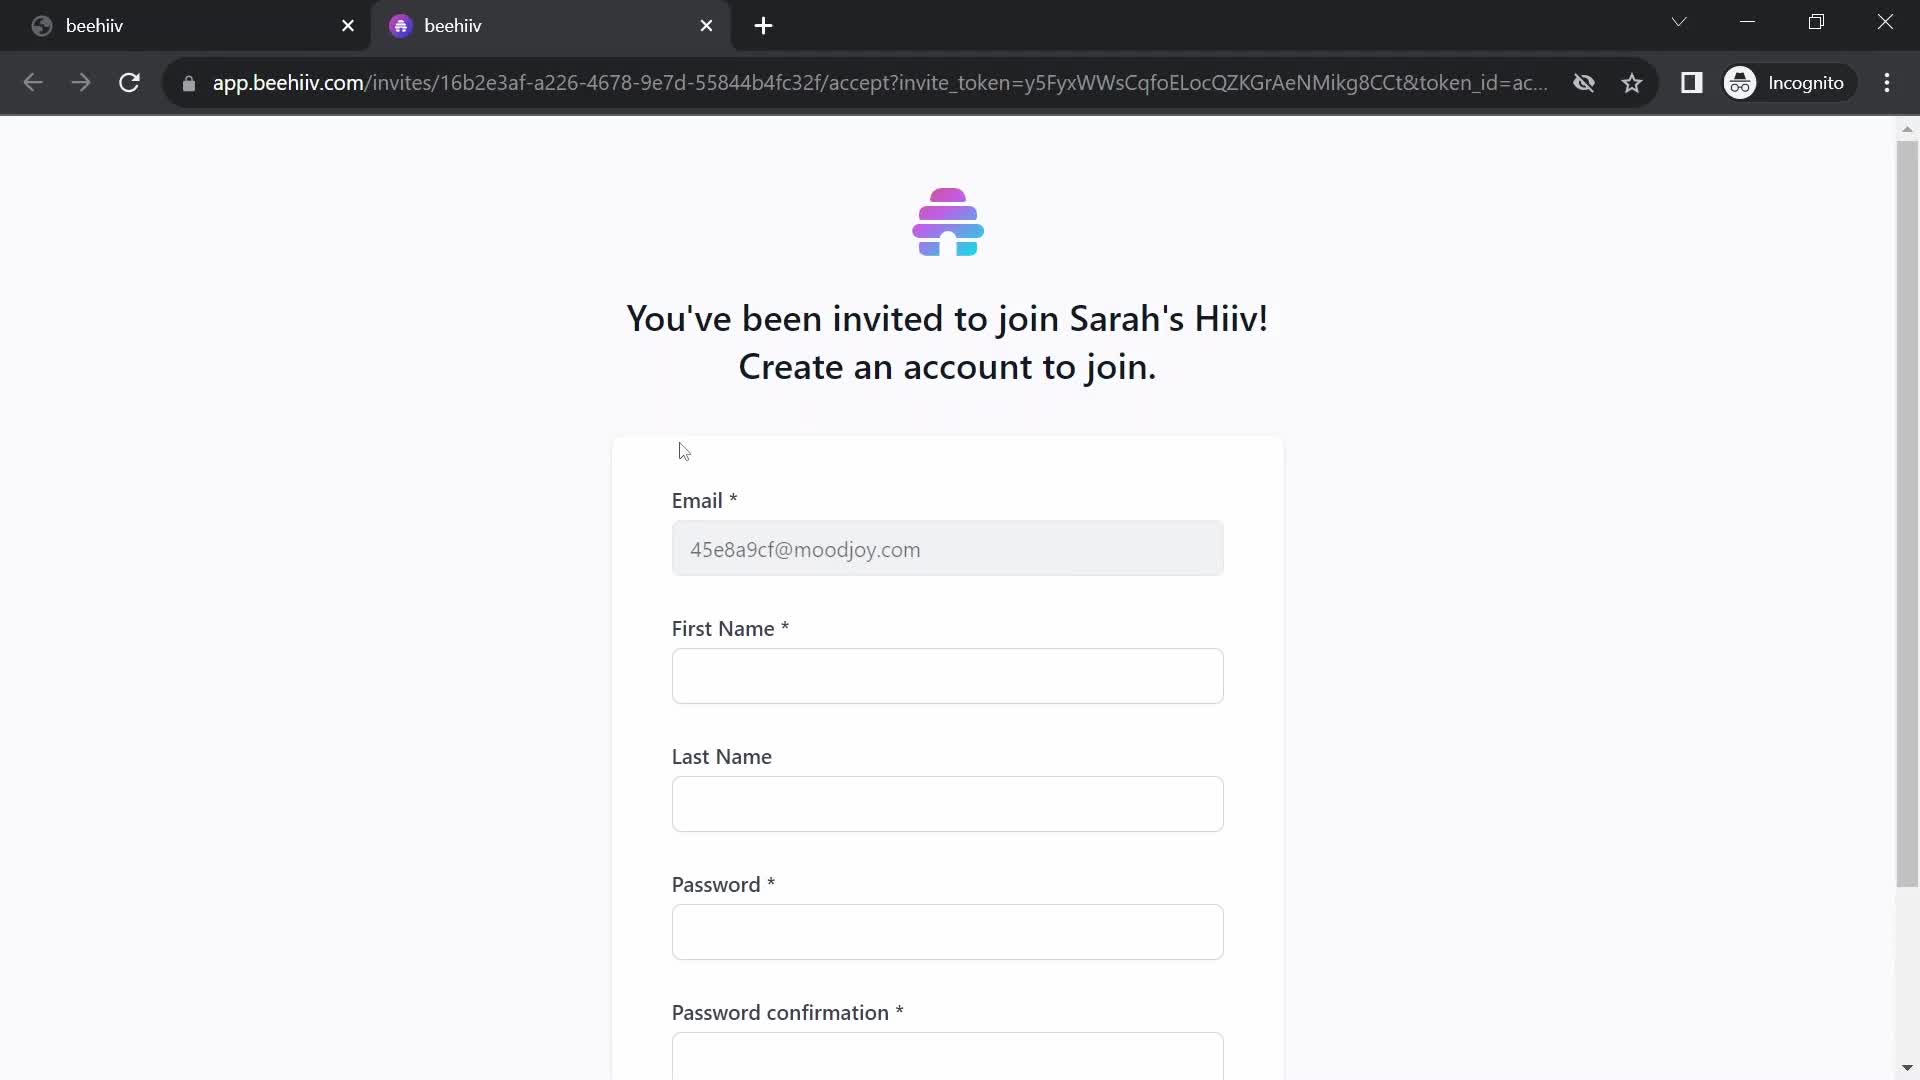 Screenshot of Sign up on Accepting an invite on Beehiiv user flow